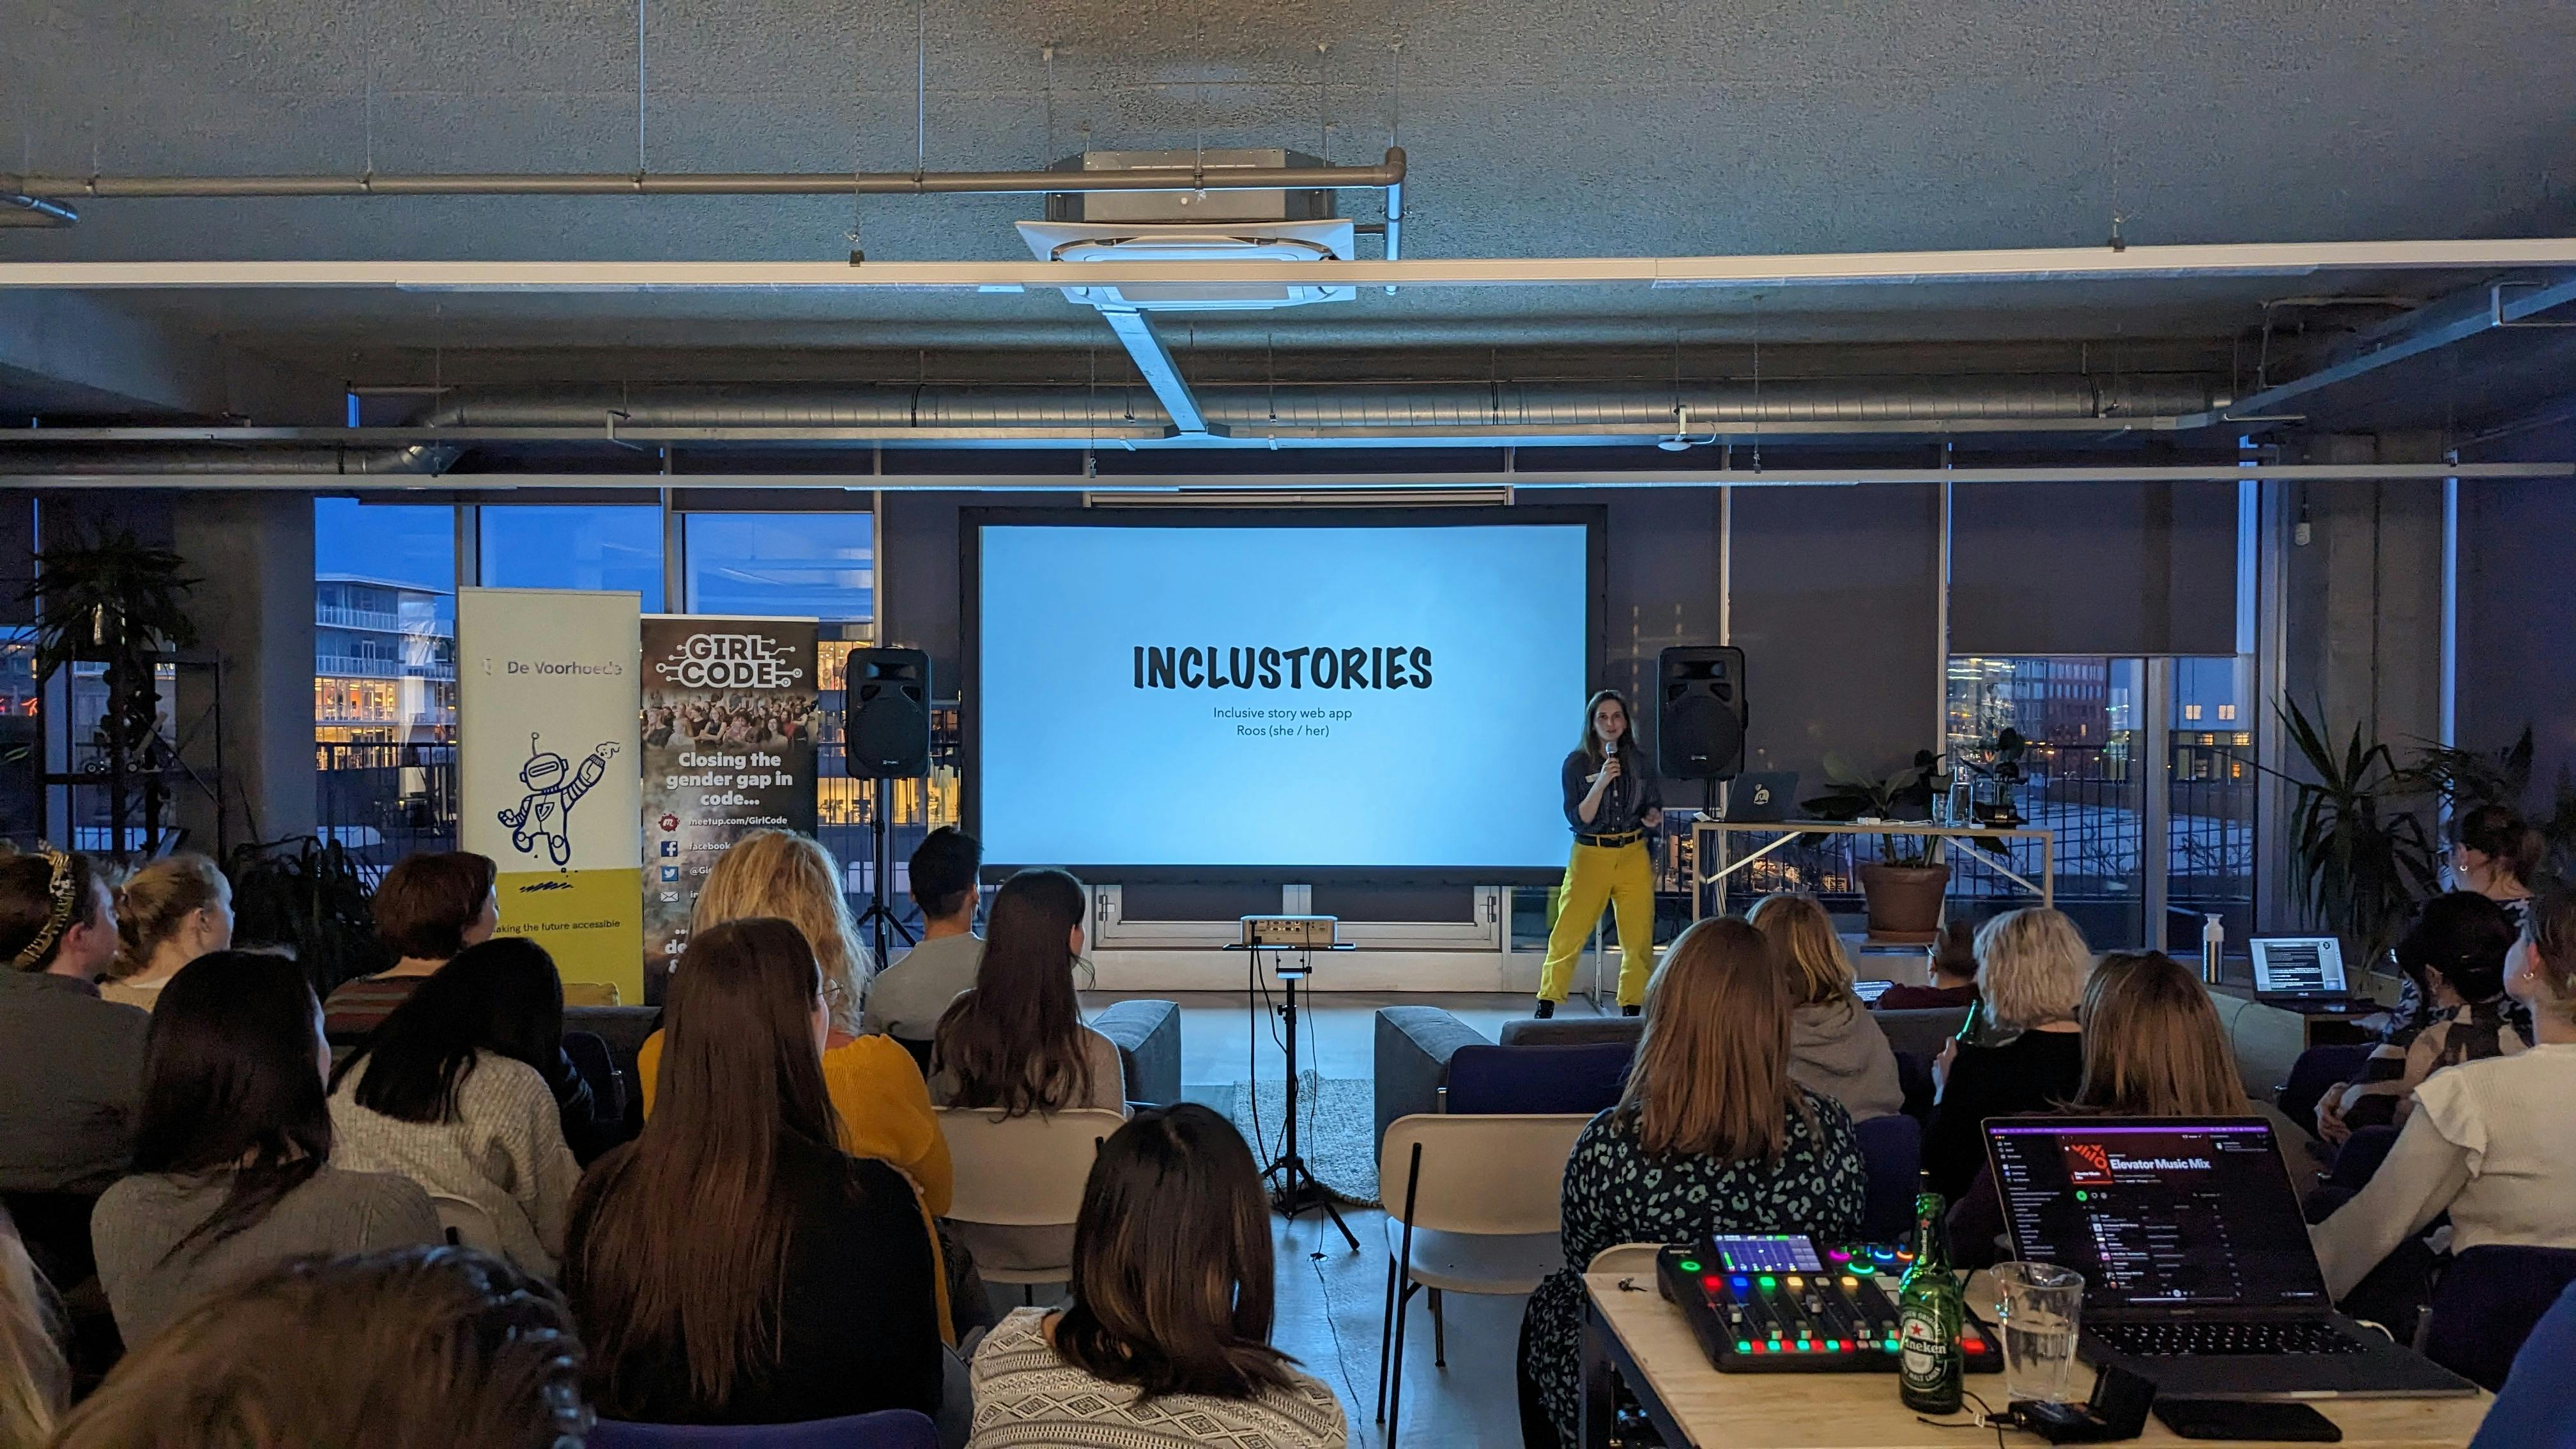 Women in a blue shirt and yellow pants presenting in front of a big screen that says 'inclustories'